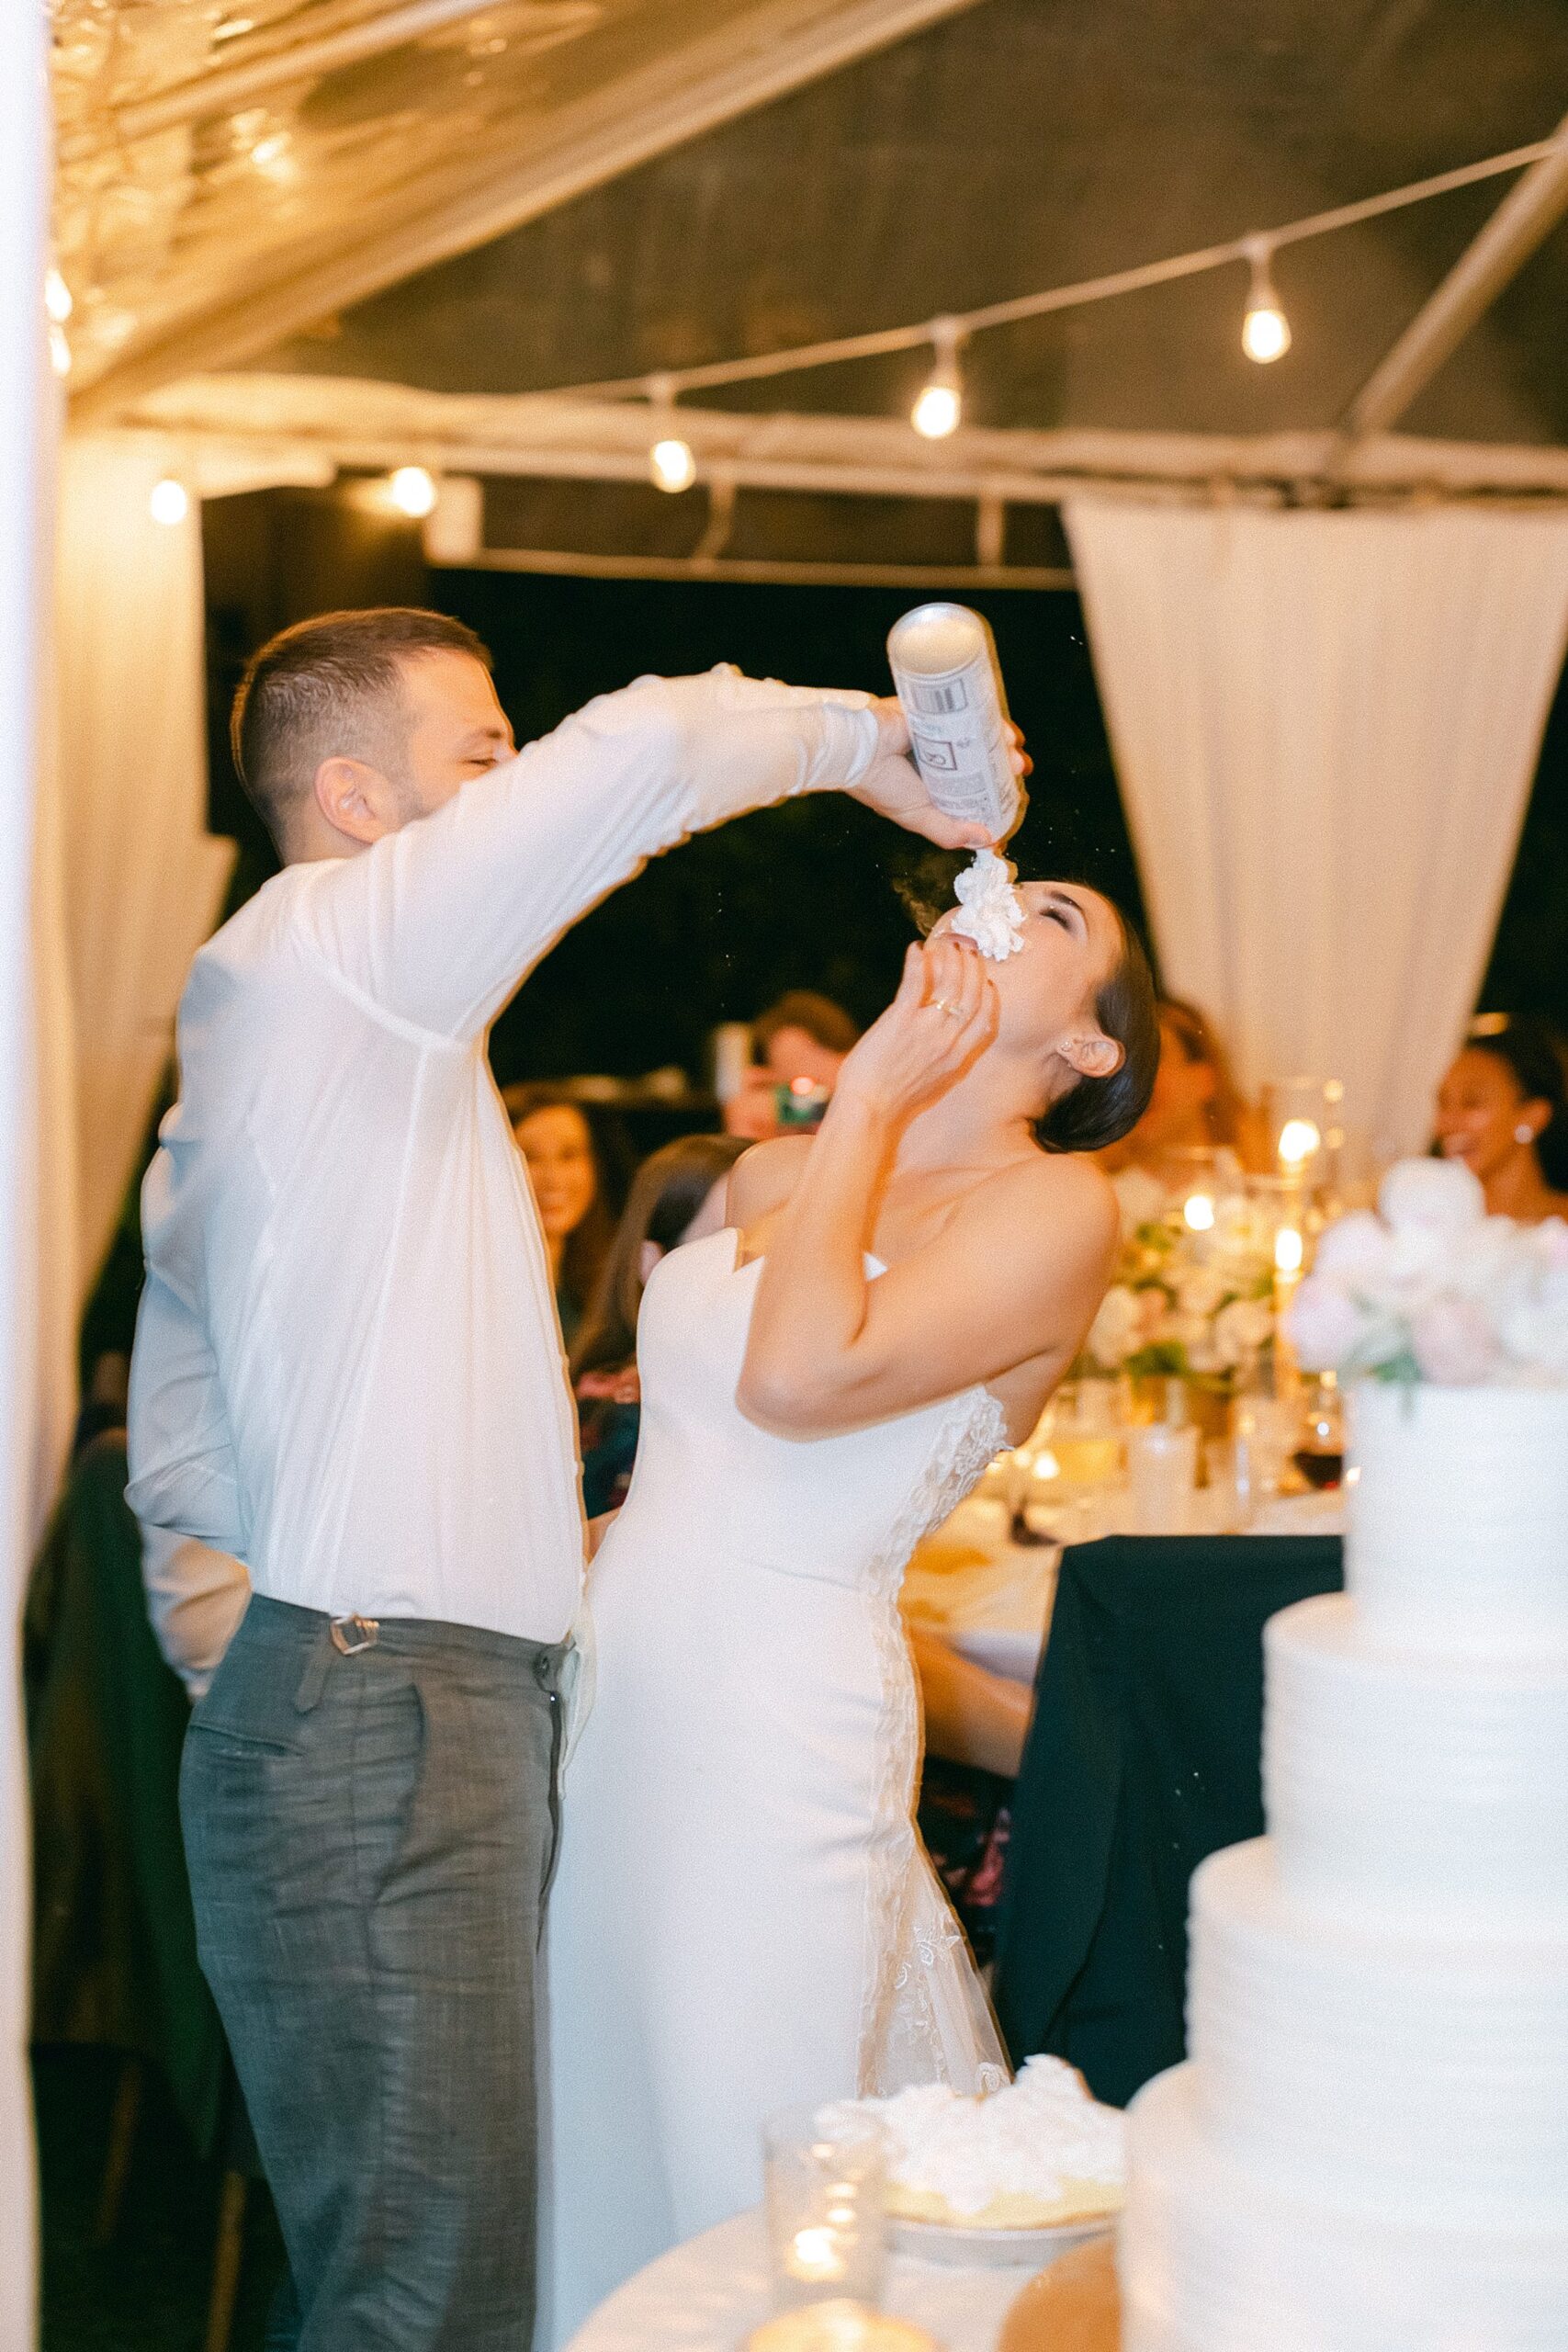 groom putting whip cream in the brides mouth at their cake cutting